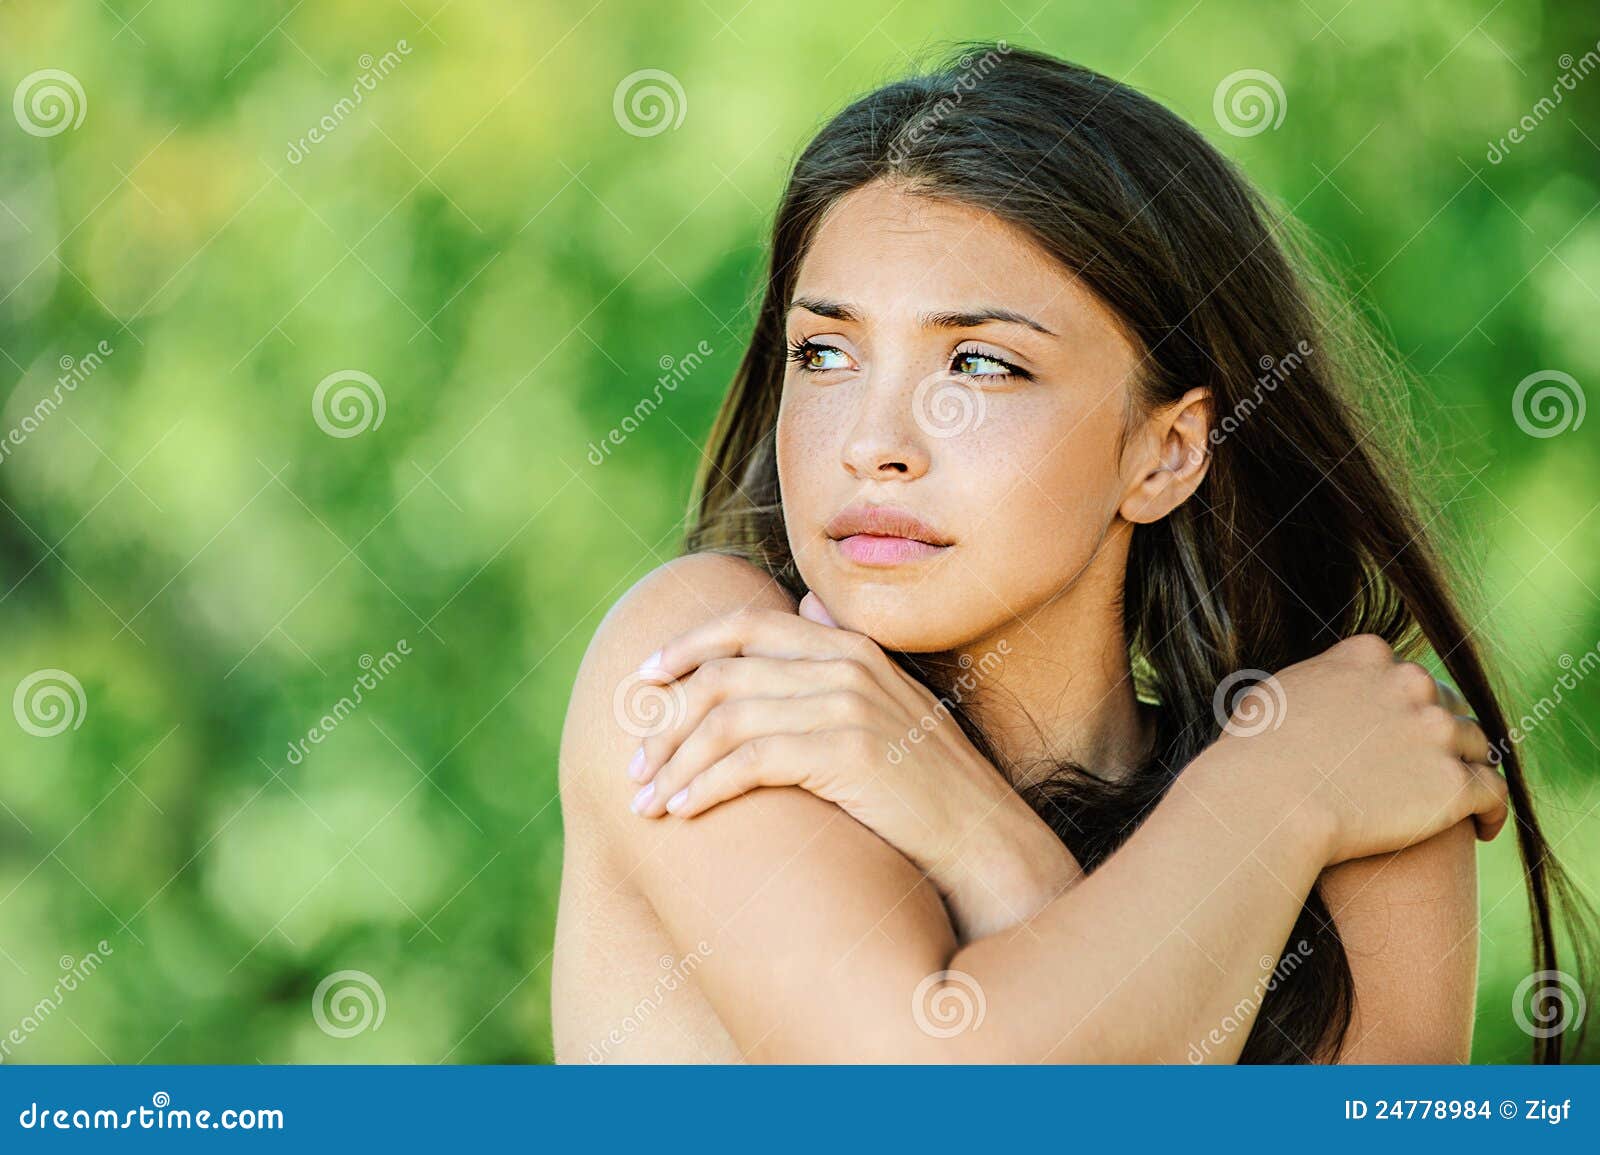 woman with bare shoulders in nature Stock Photo